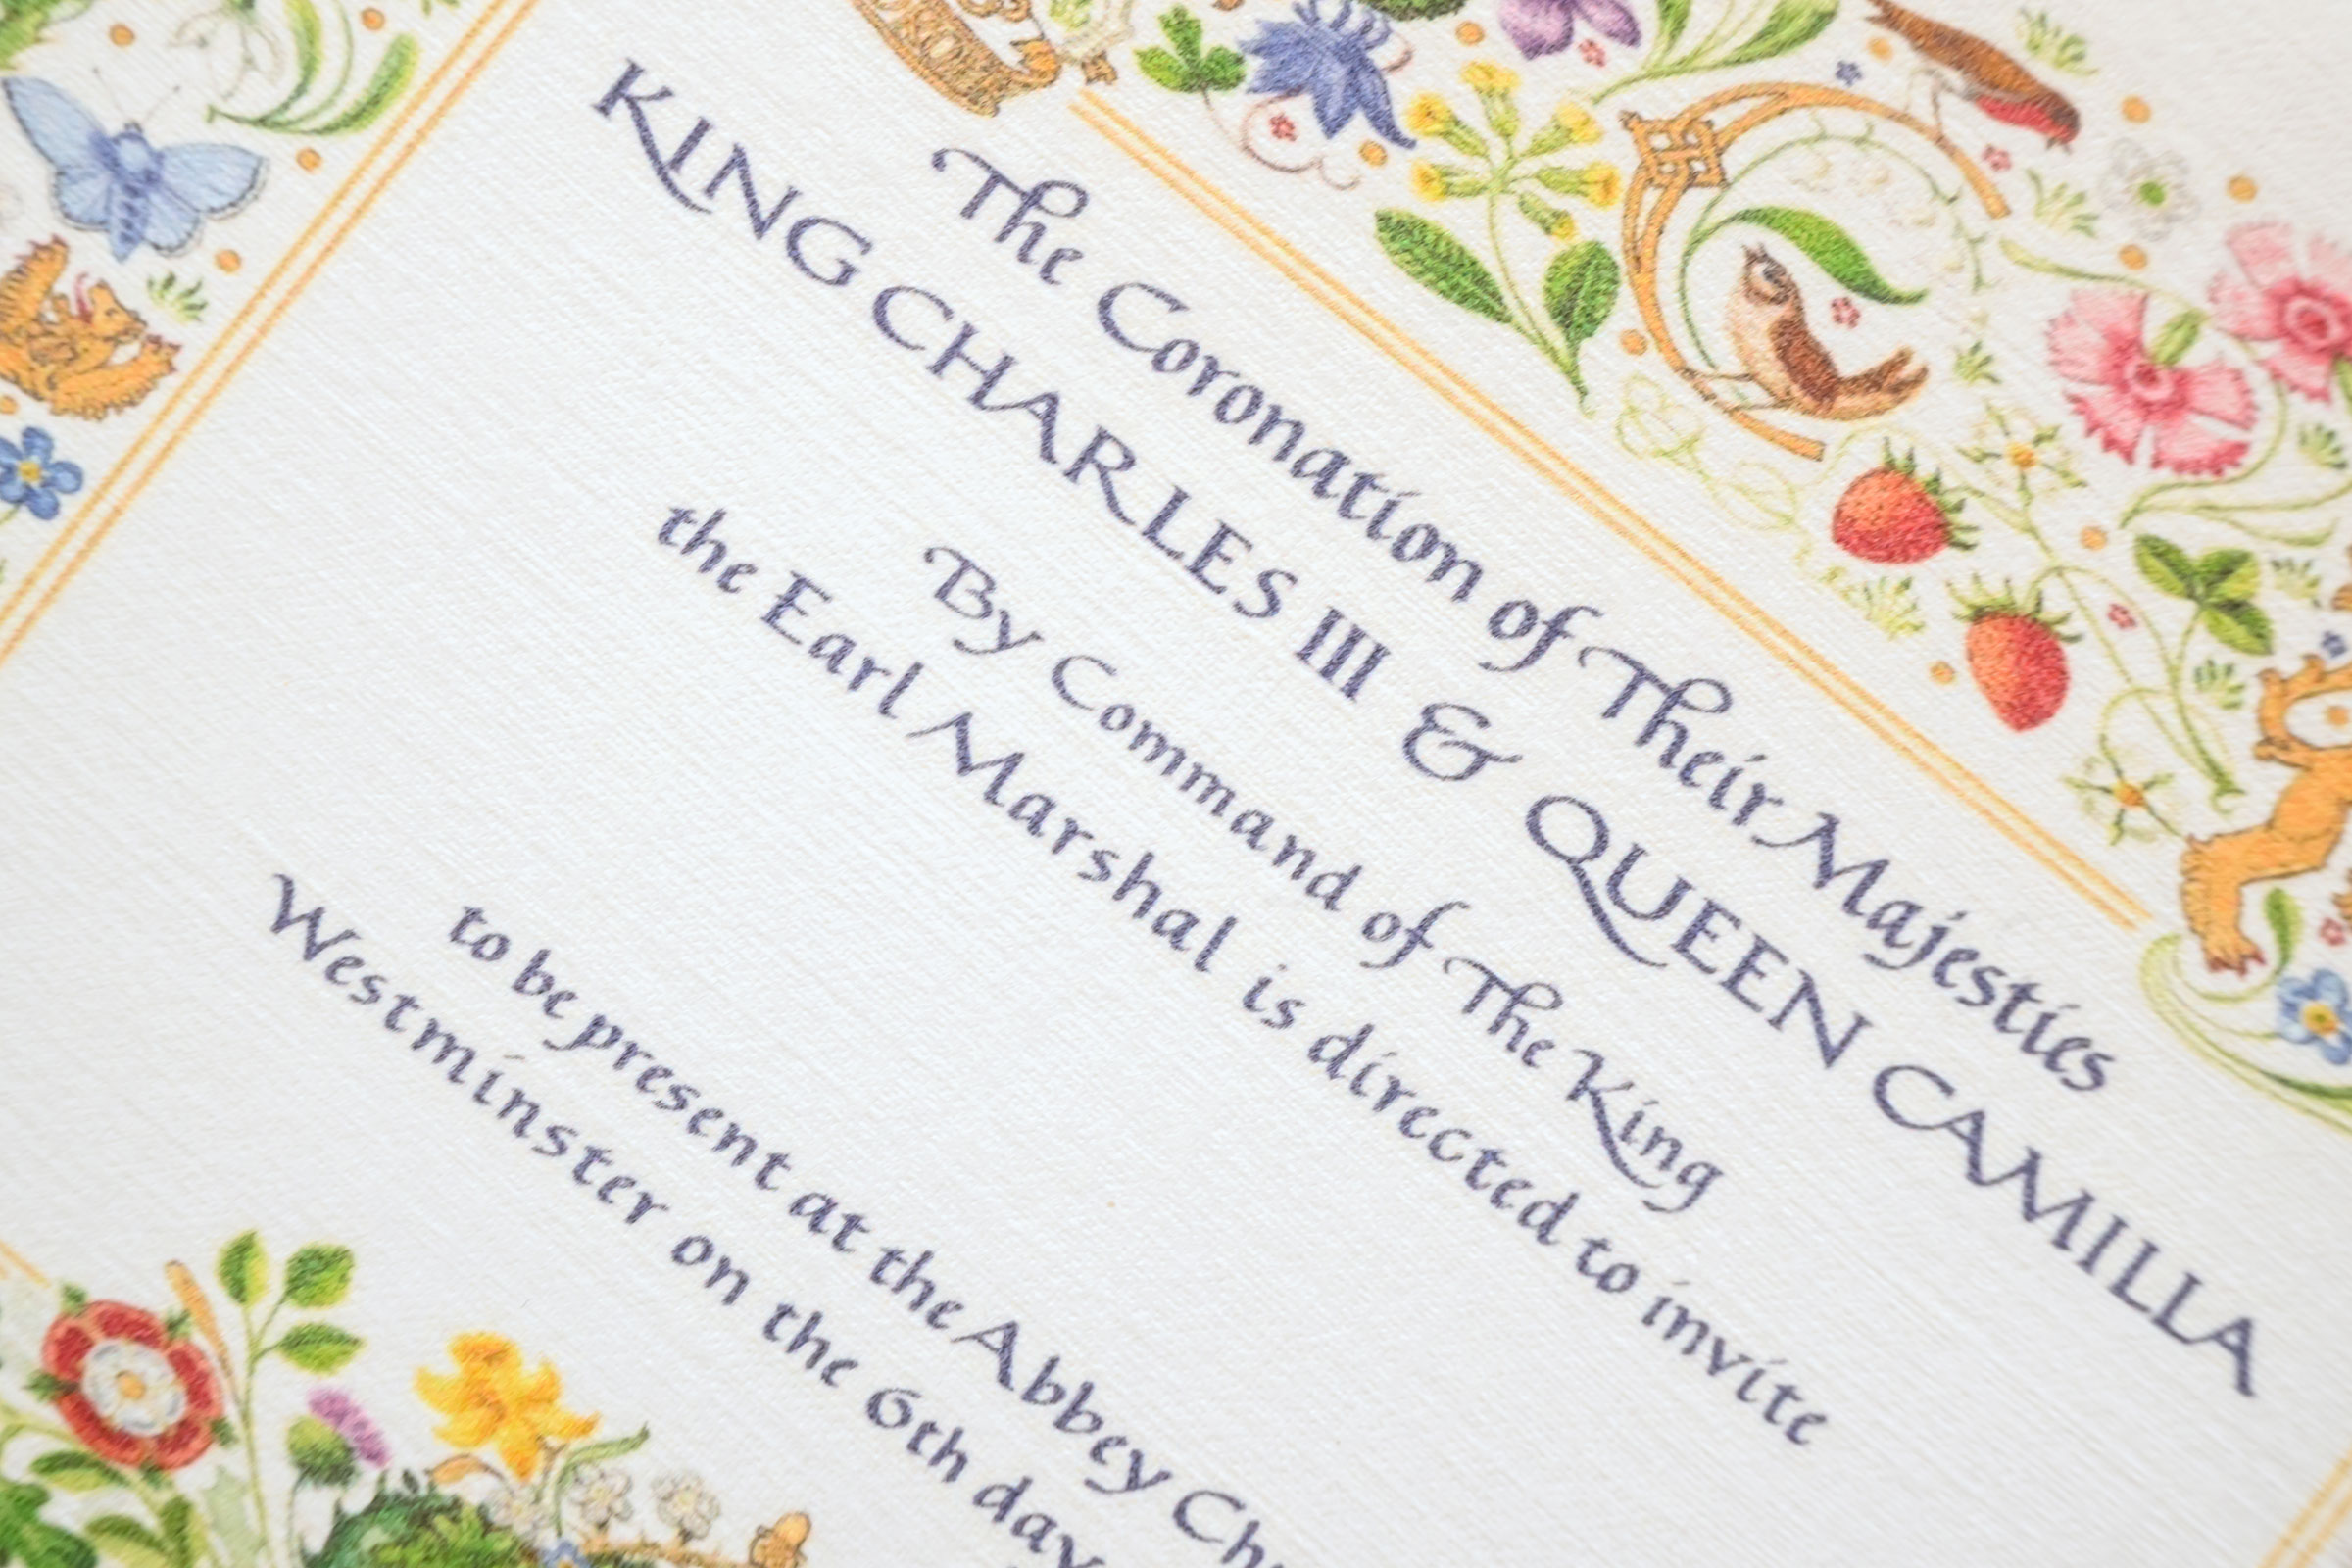 A souvenir replica invitation marking the Coronation of King Charles III. (Leon Neal—Getty Images)